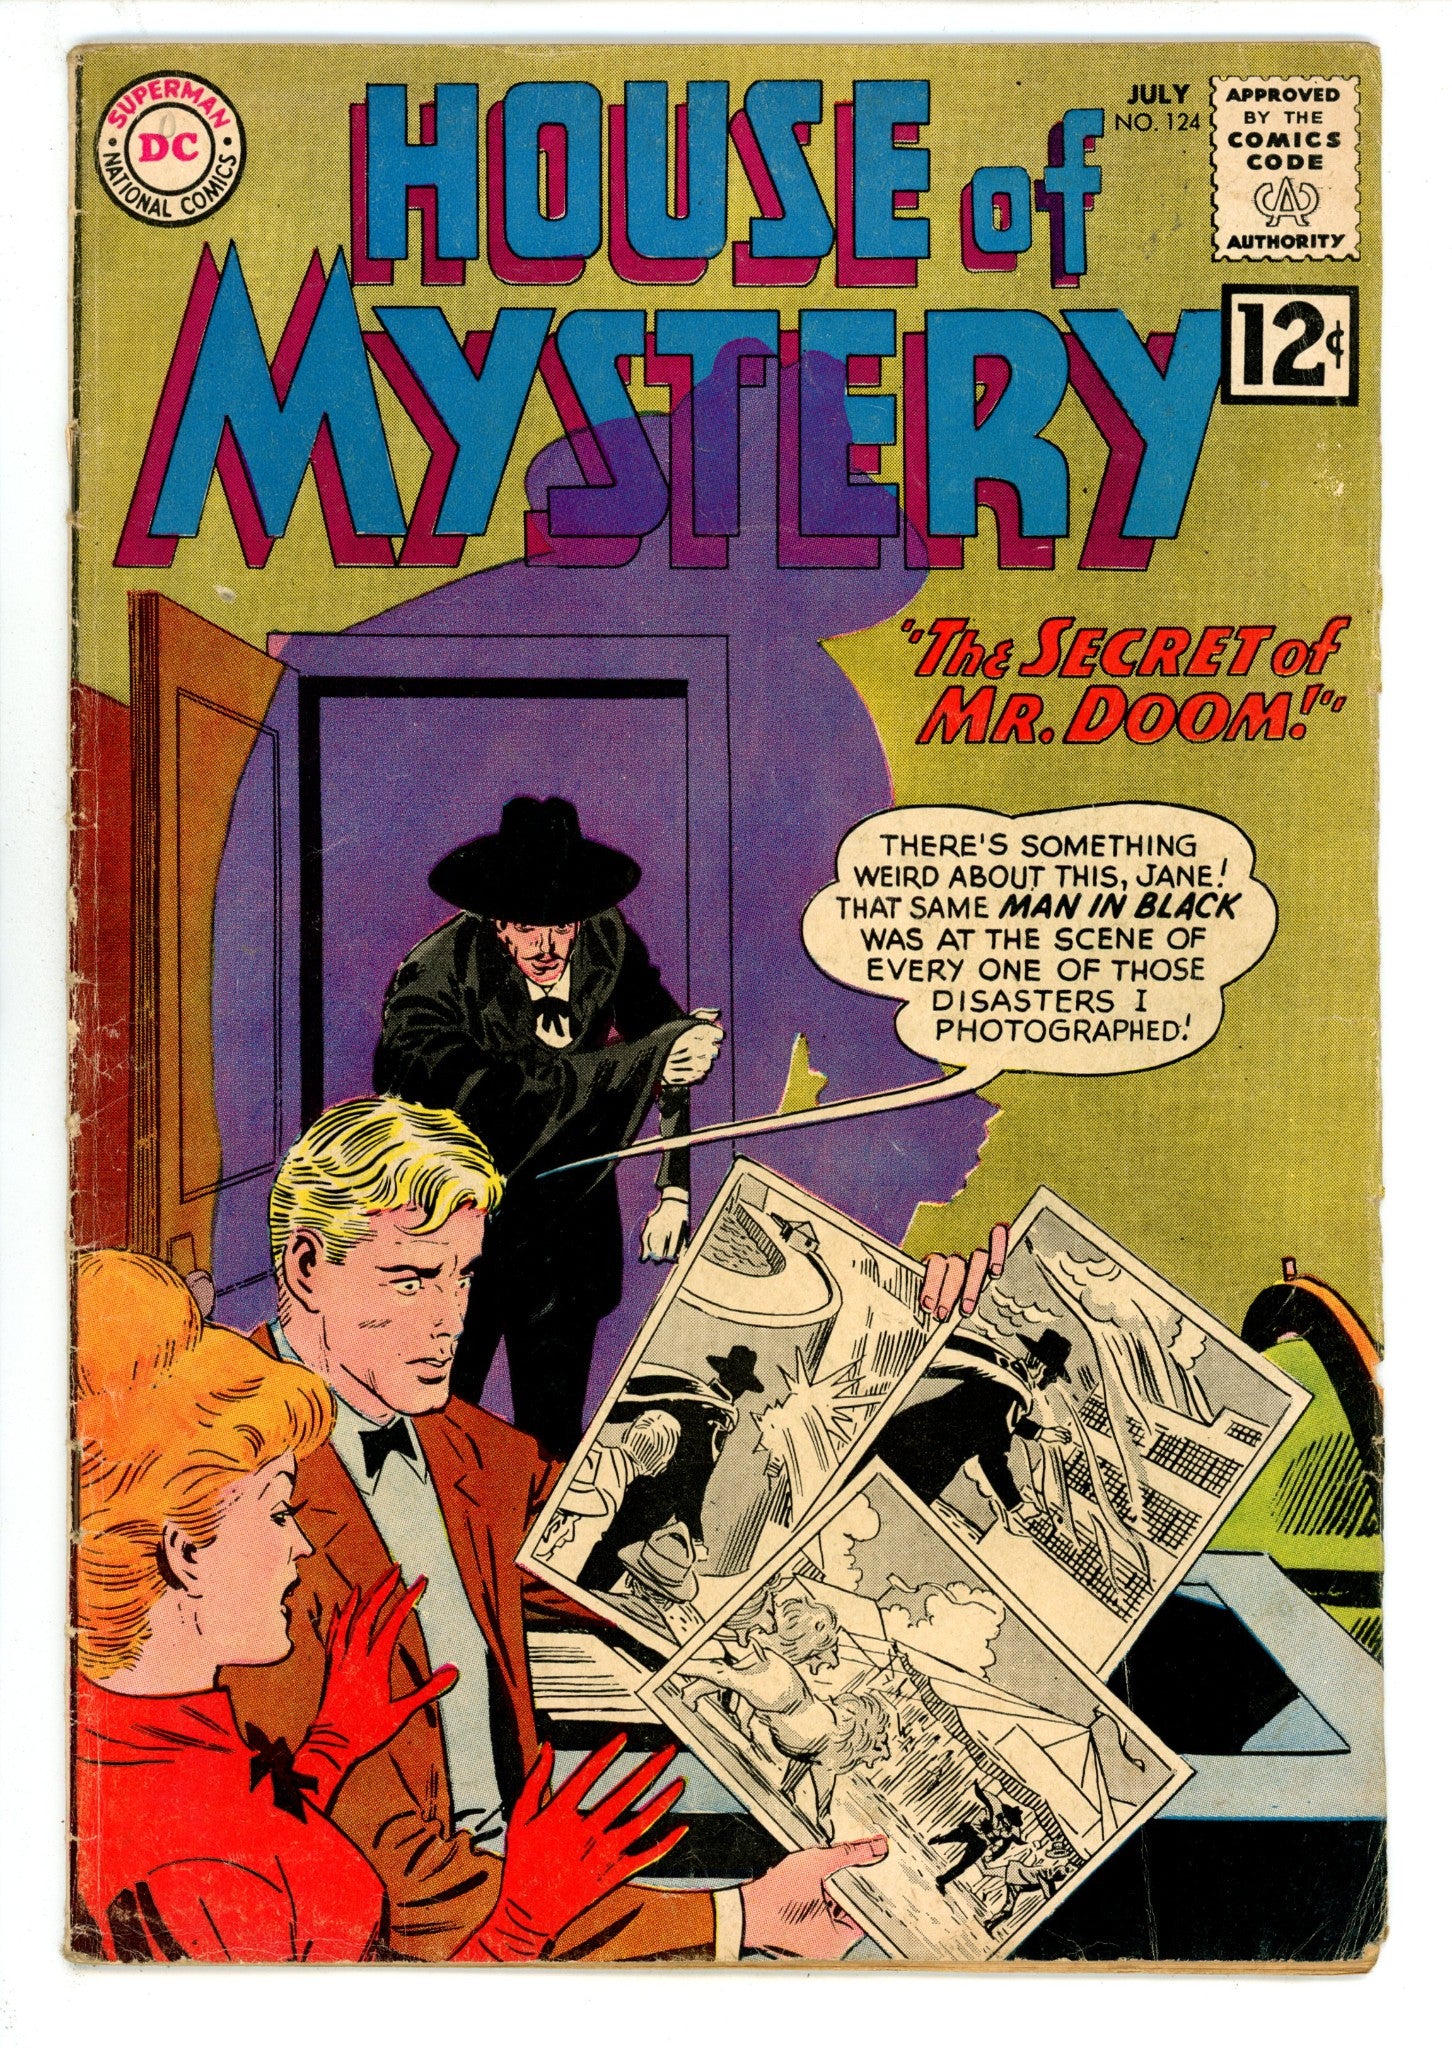 House of Mystery Vol 1 124 VG- (3.5) (1962) 